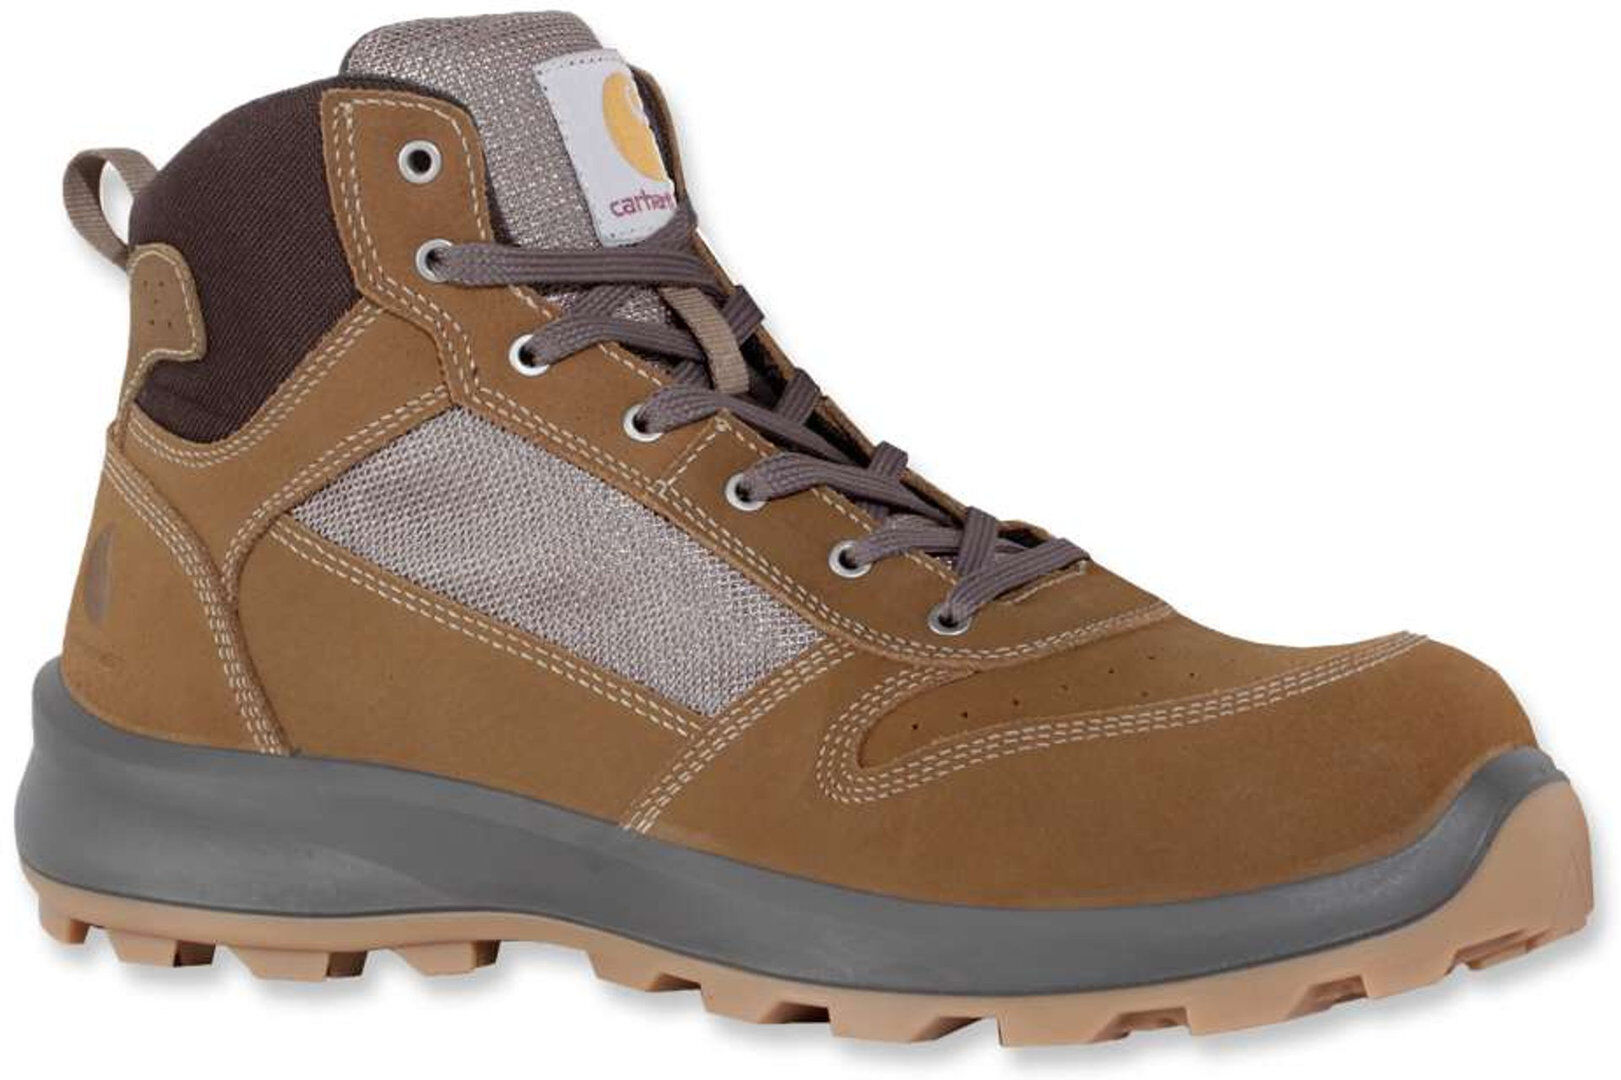 Carhartt Mid S1P Safety Bottes Brun taille : 41